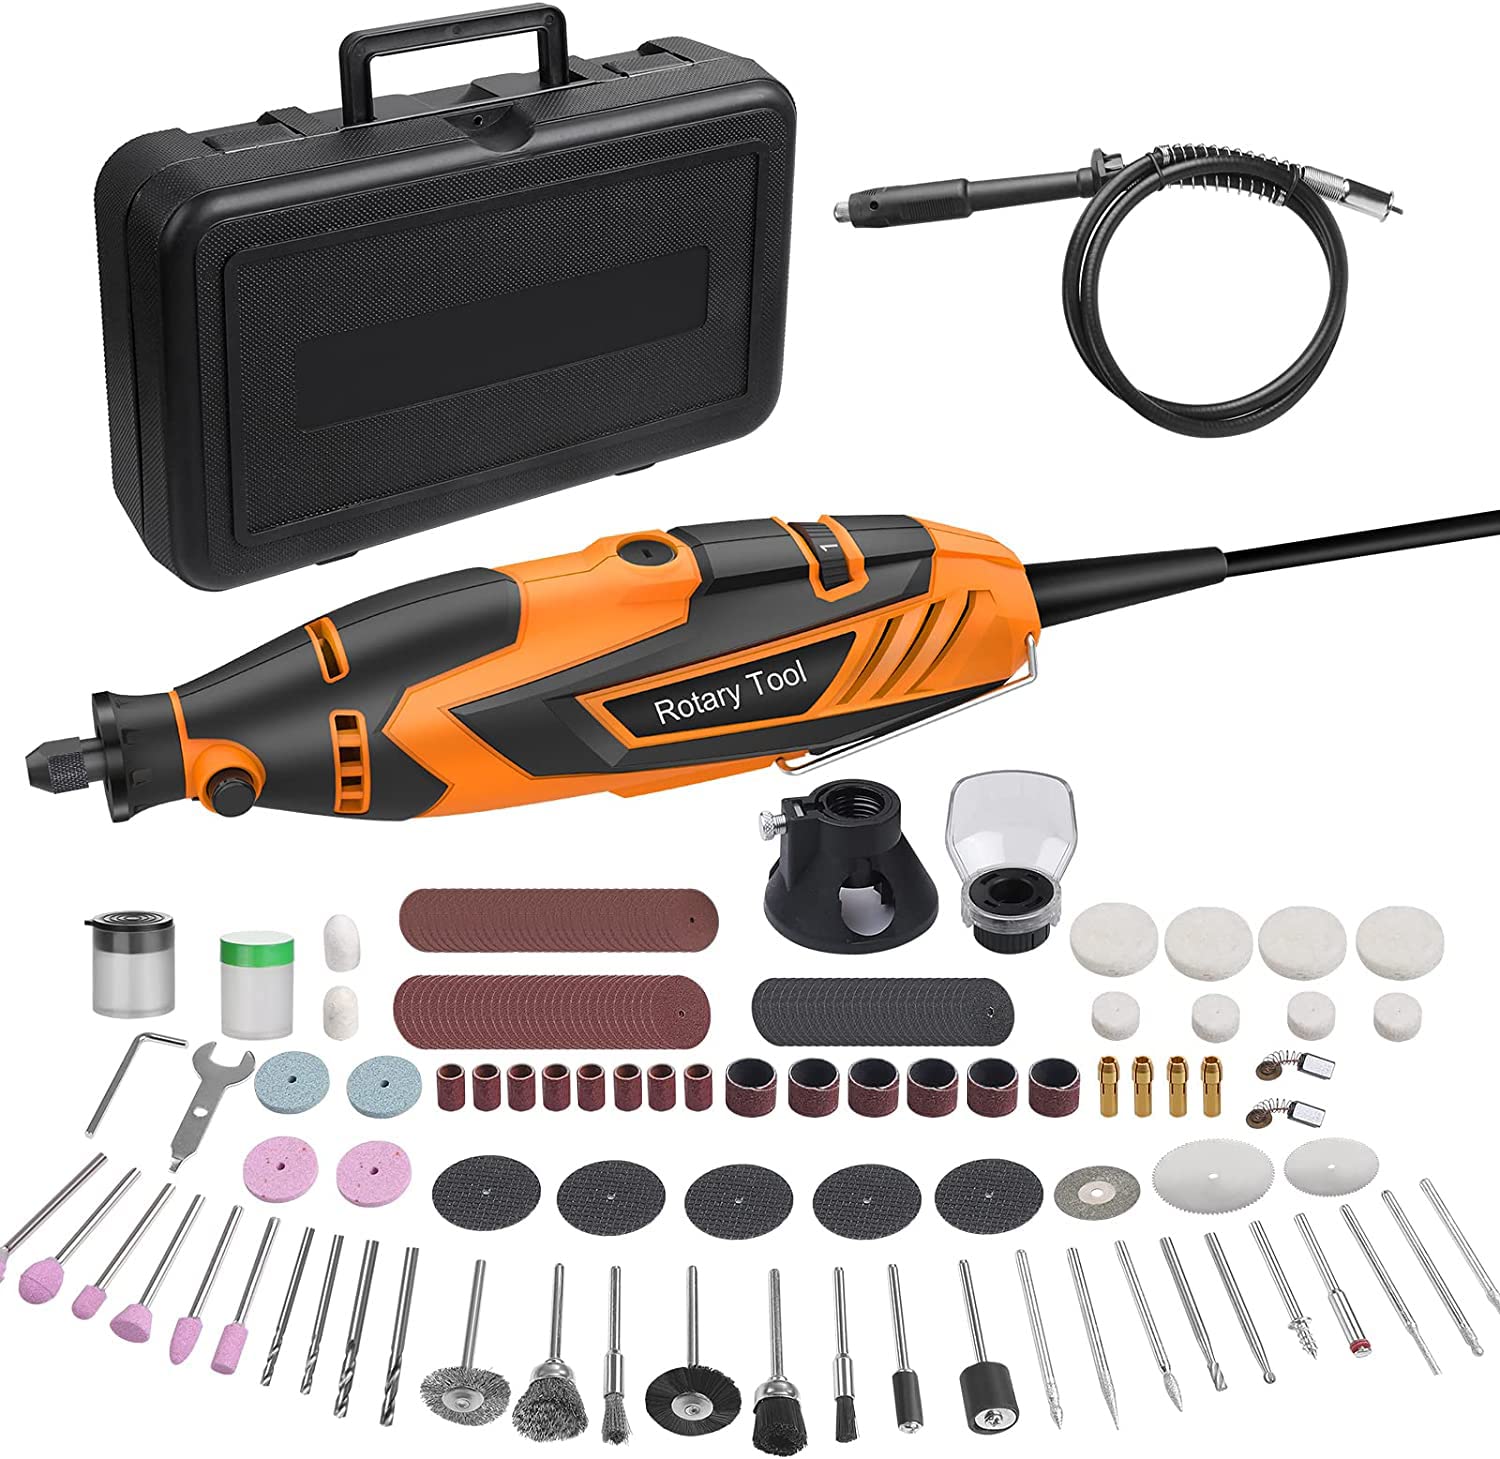 Vastar Power Rotary Tool Kit, Mini Rechargeable with 211 Accessories, 3 Attachments, 6 Levels Adjustable and Carrying Case for Crafting, Cutting, Engraving $38.99 - $19.38